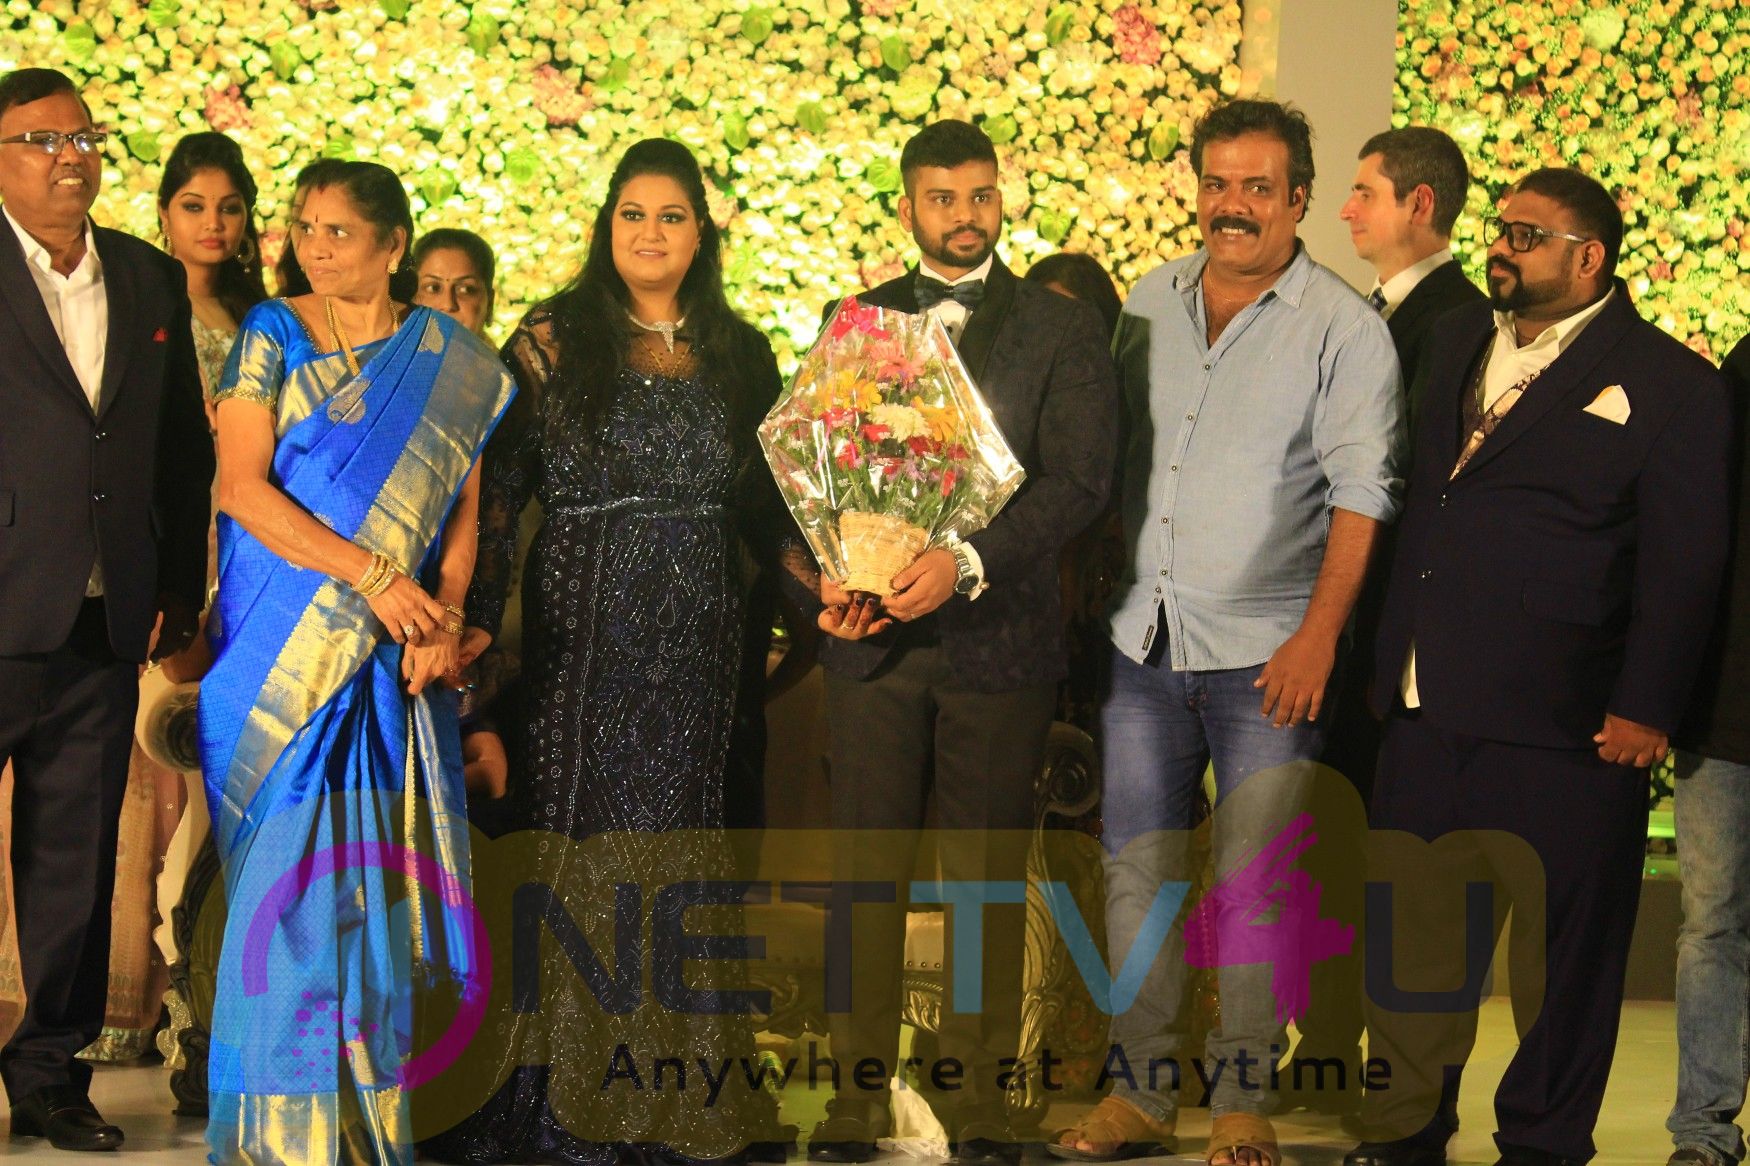 Le Meridien Hotel Chairman G.Periasamy Daughter Anandhi Wedding Reception  Tamil Gallery